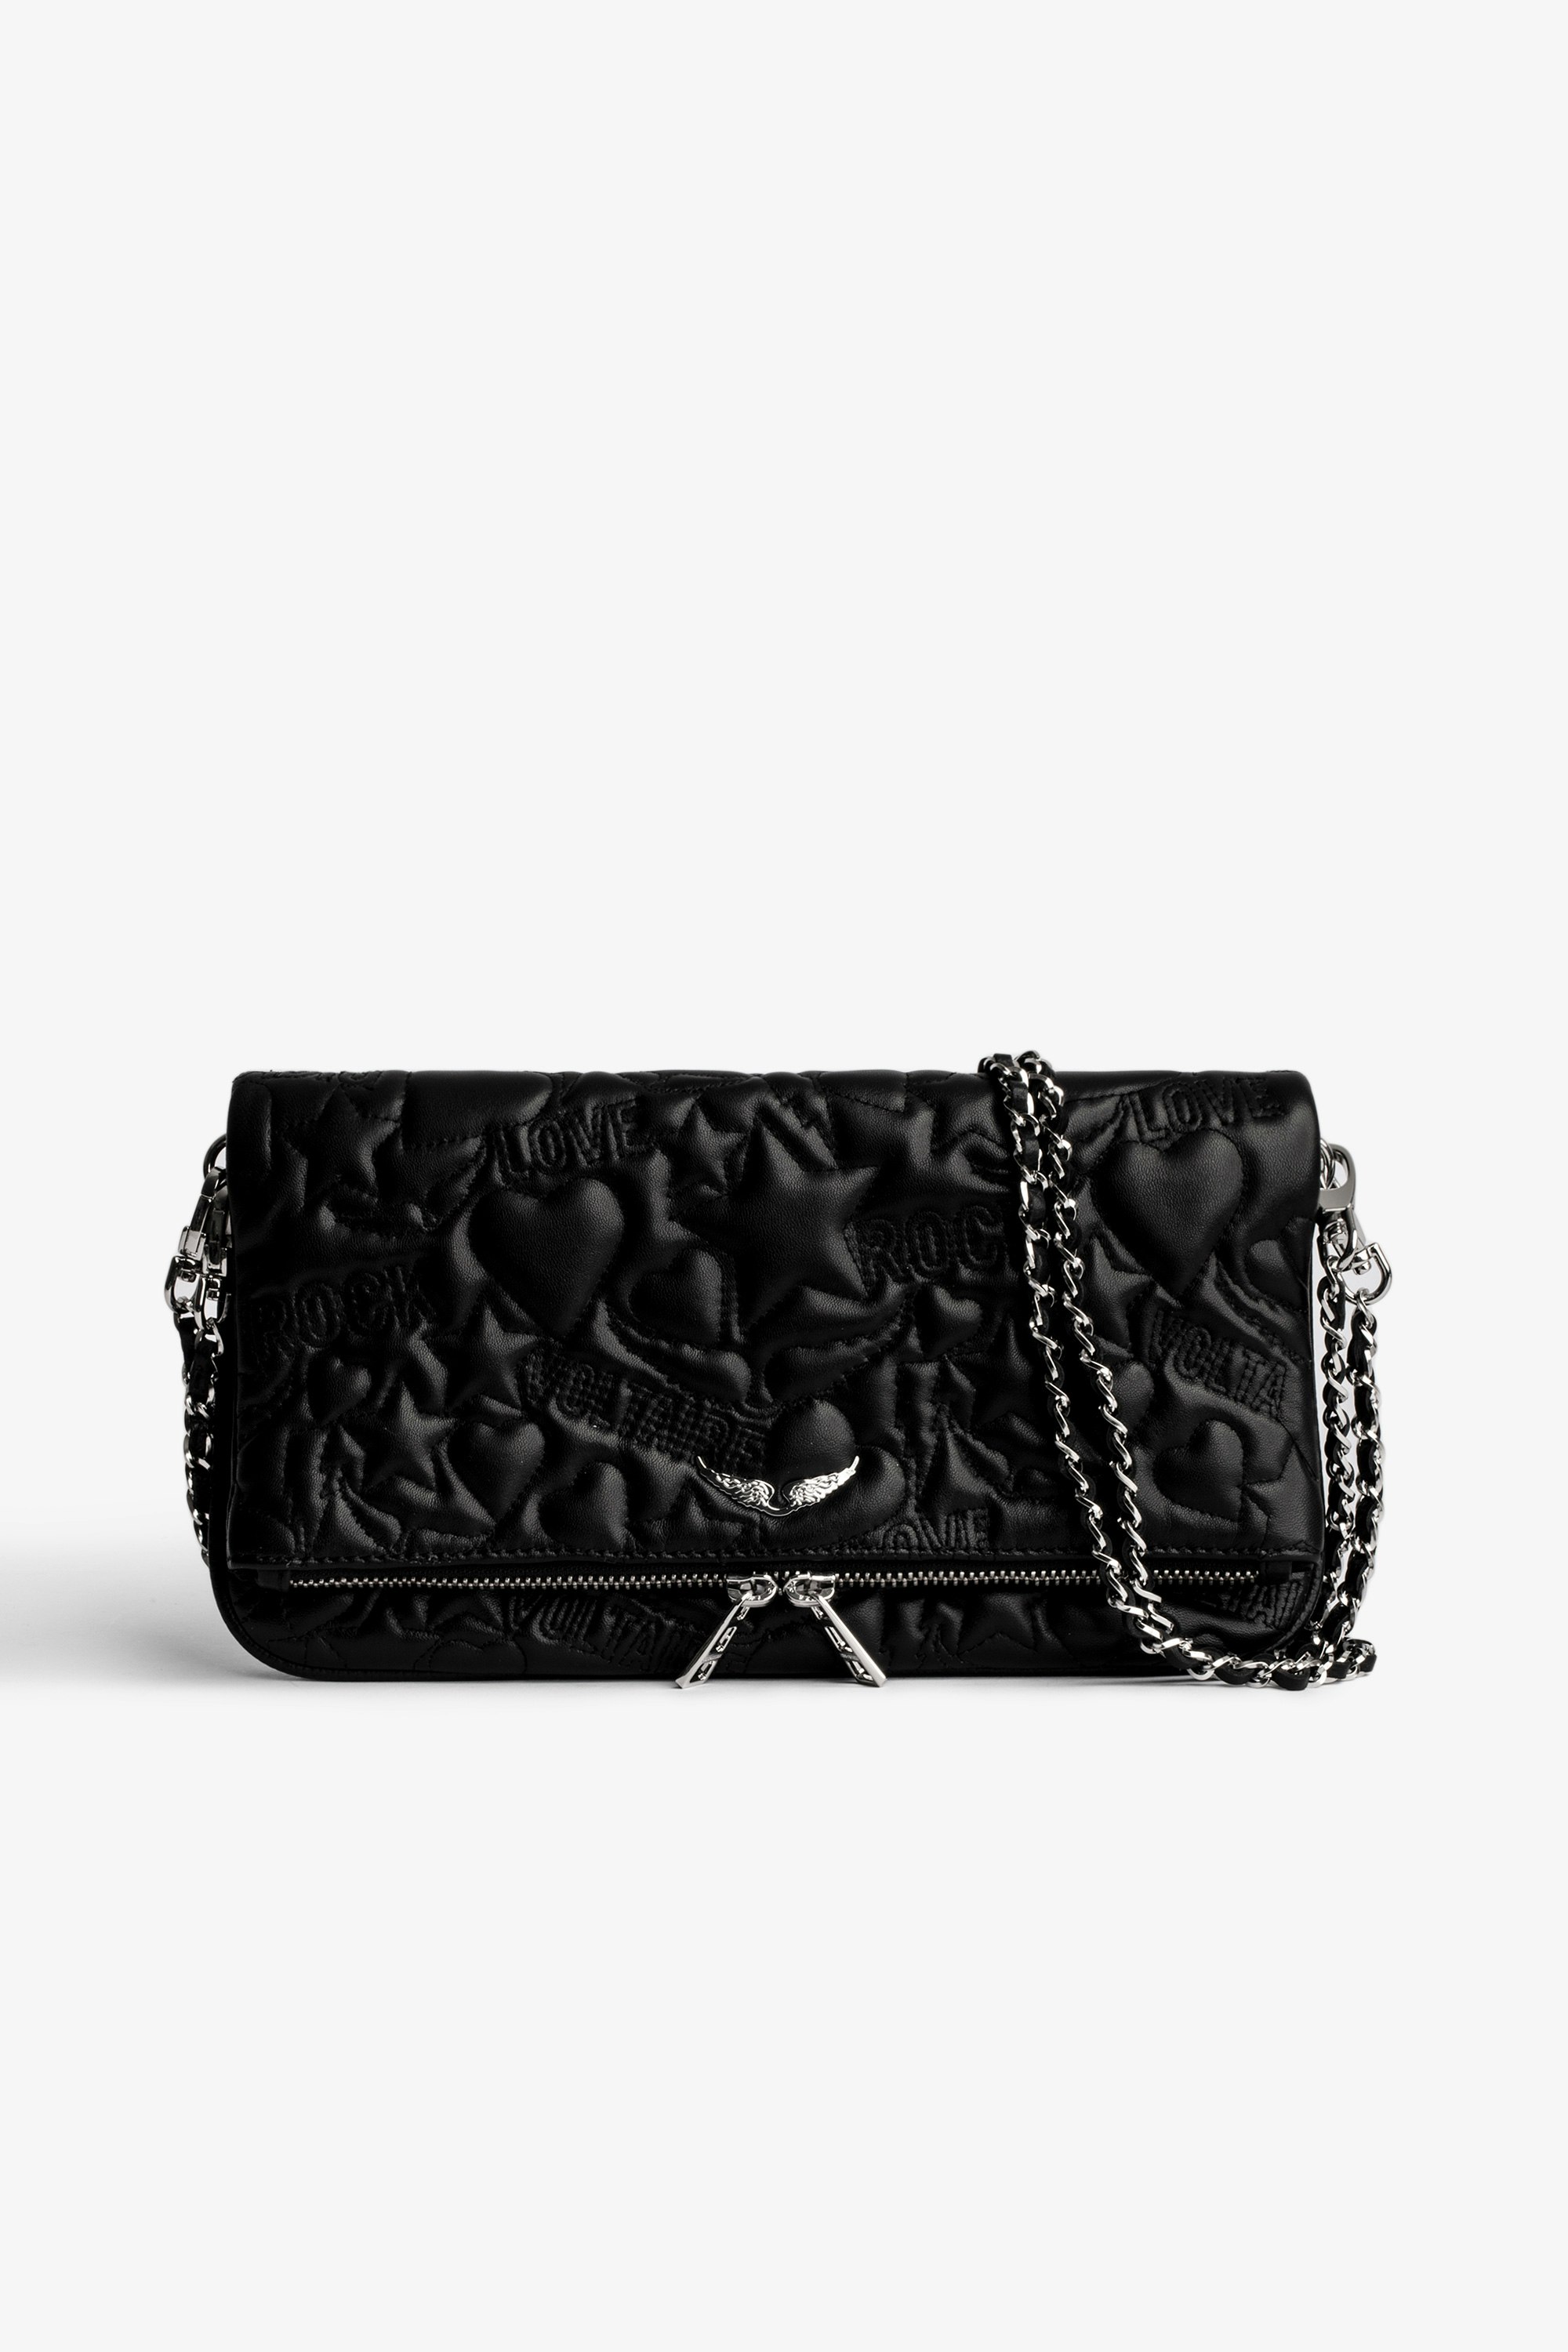 Rock クラッチバッグ Women’s black quilted leather clutch bag with topstitched motifs